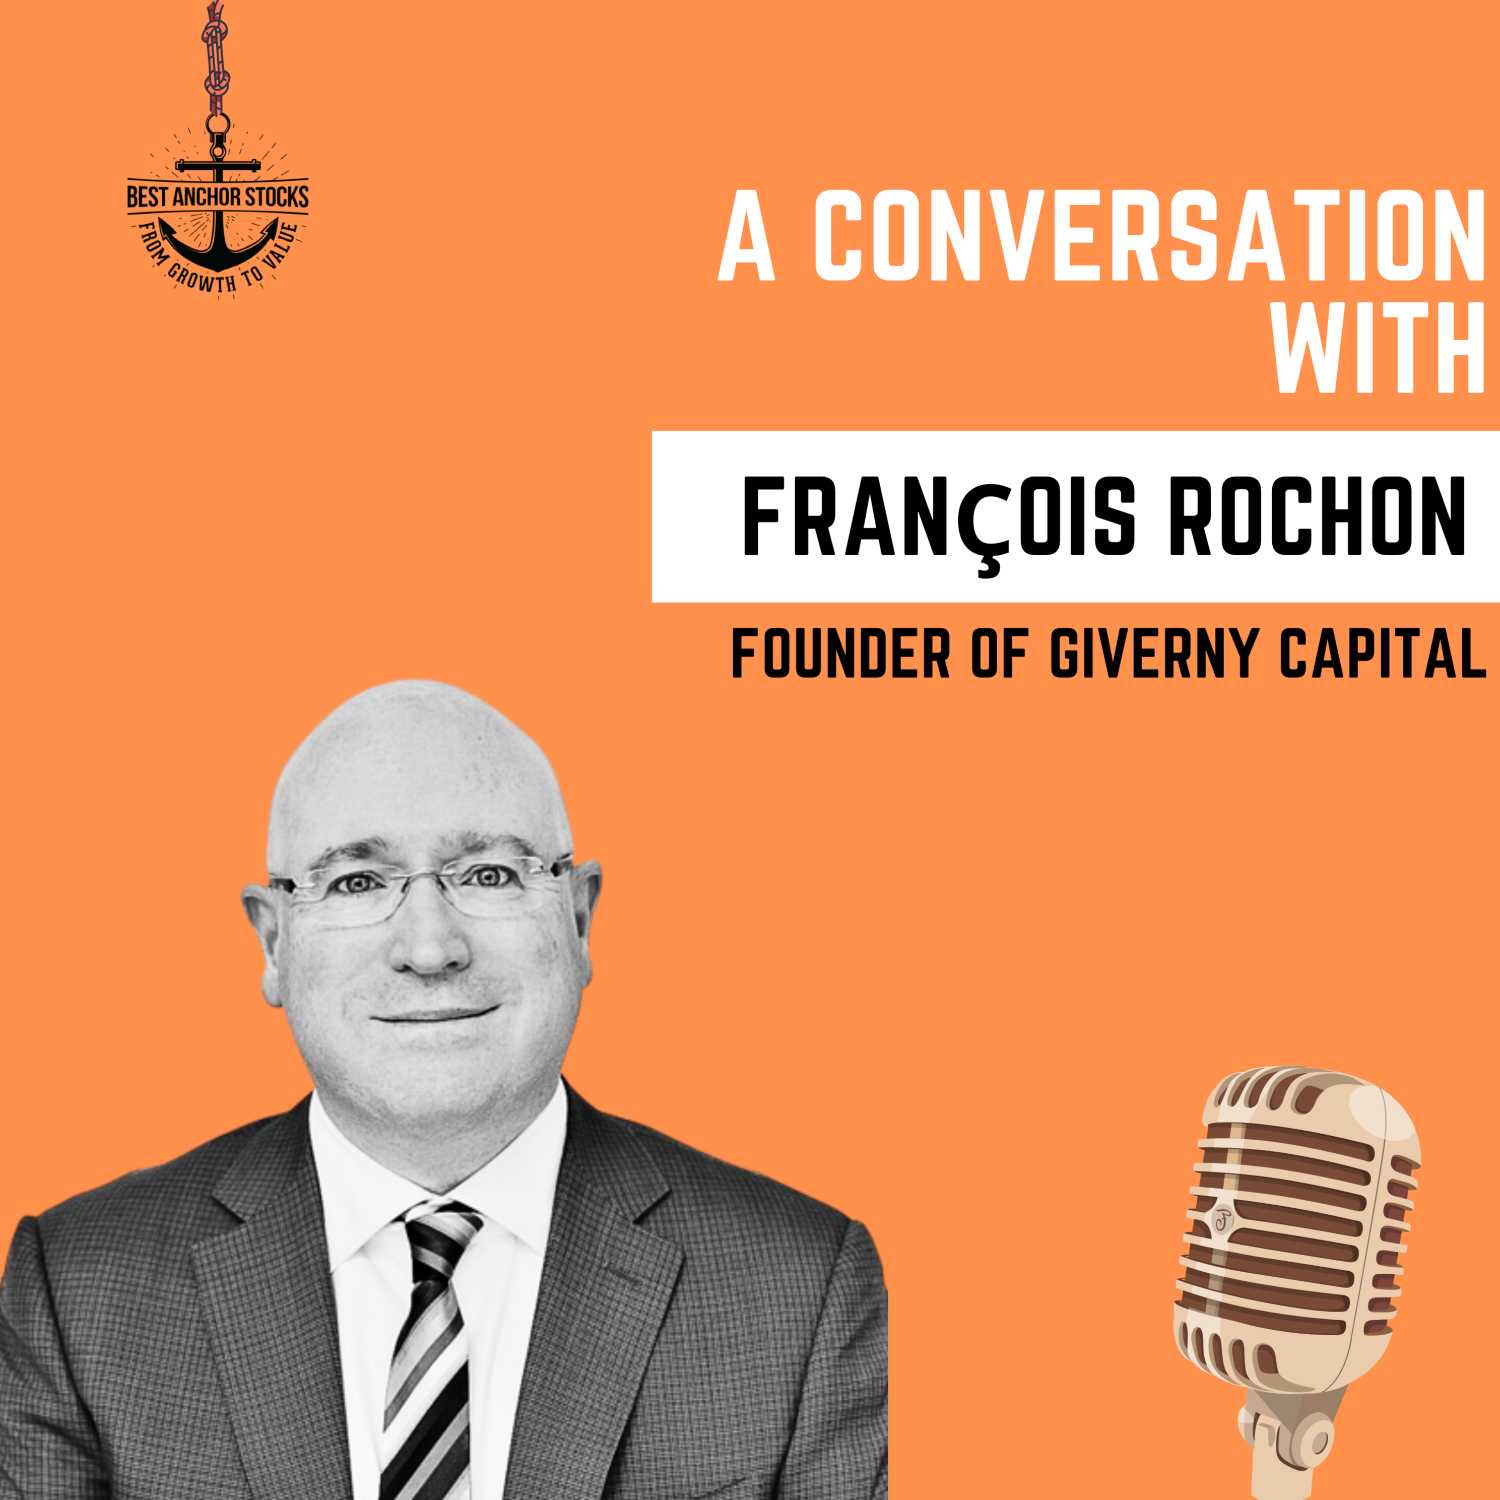 A Conversation With François Rochon, founder of Giverny Capital